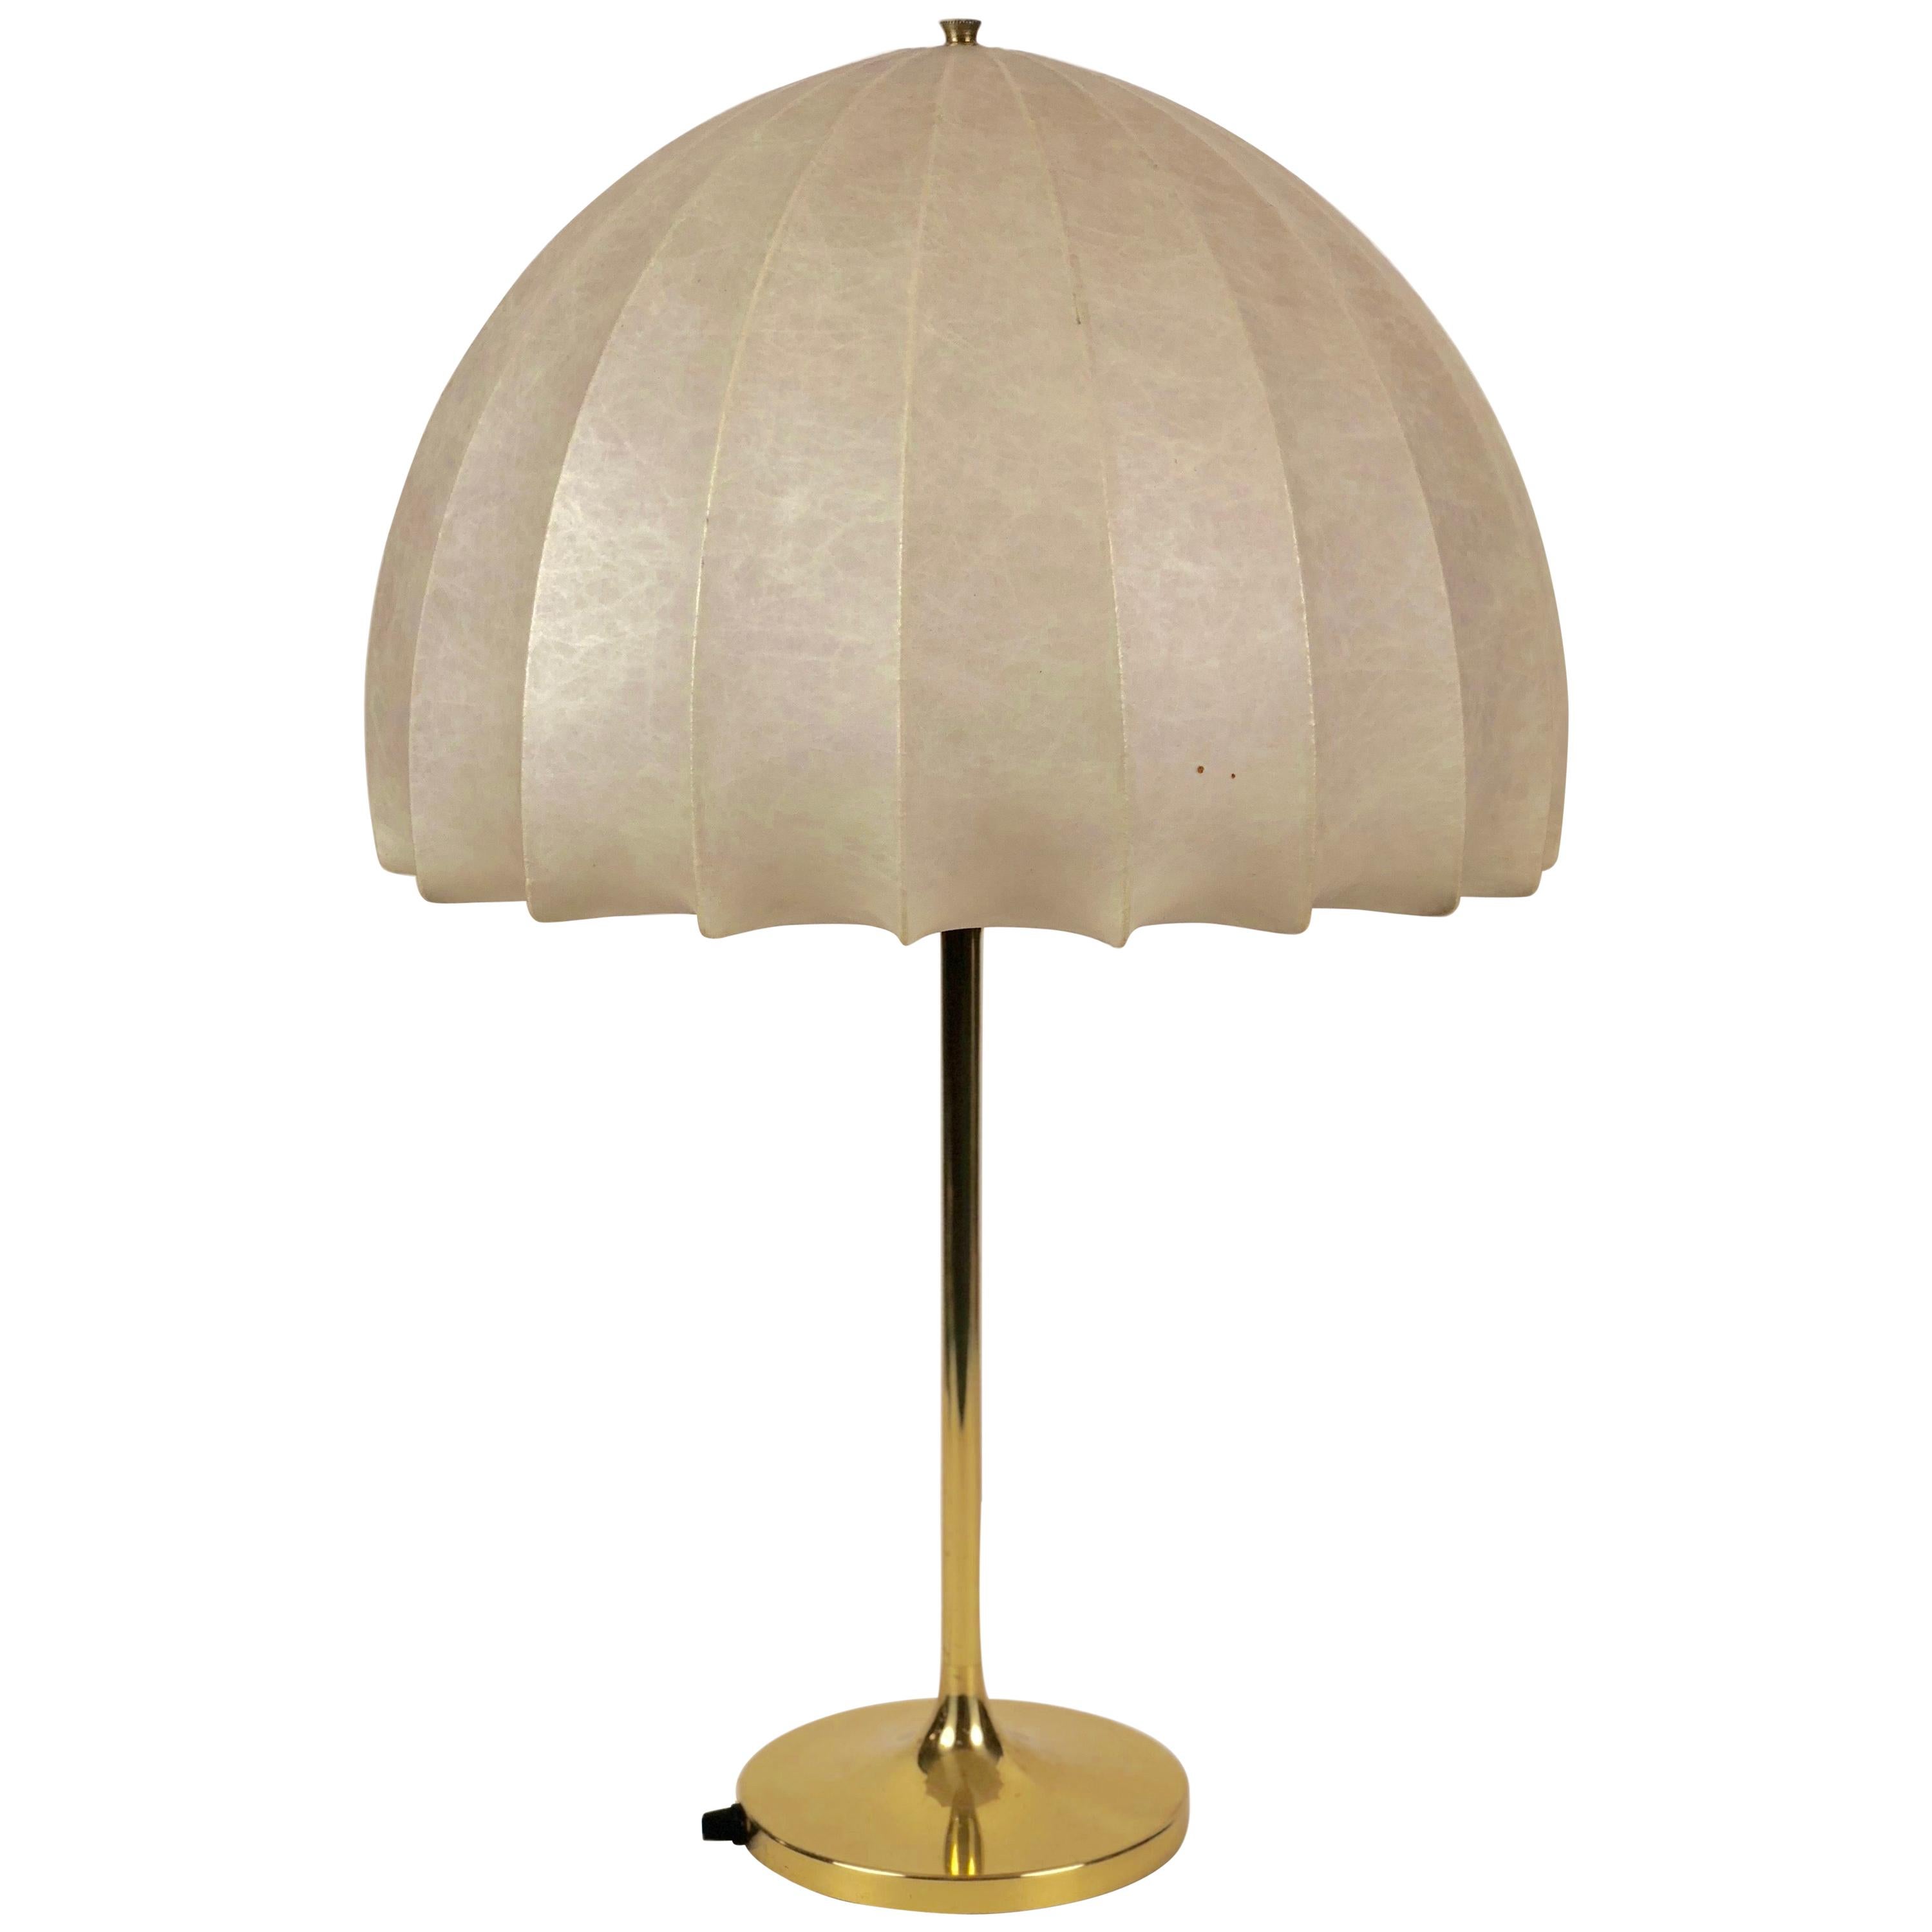 Mushroom Lamp from the 1970s, Made in Austria